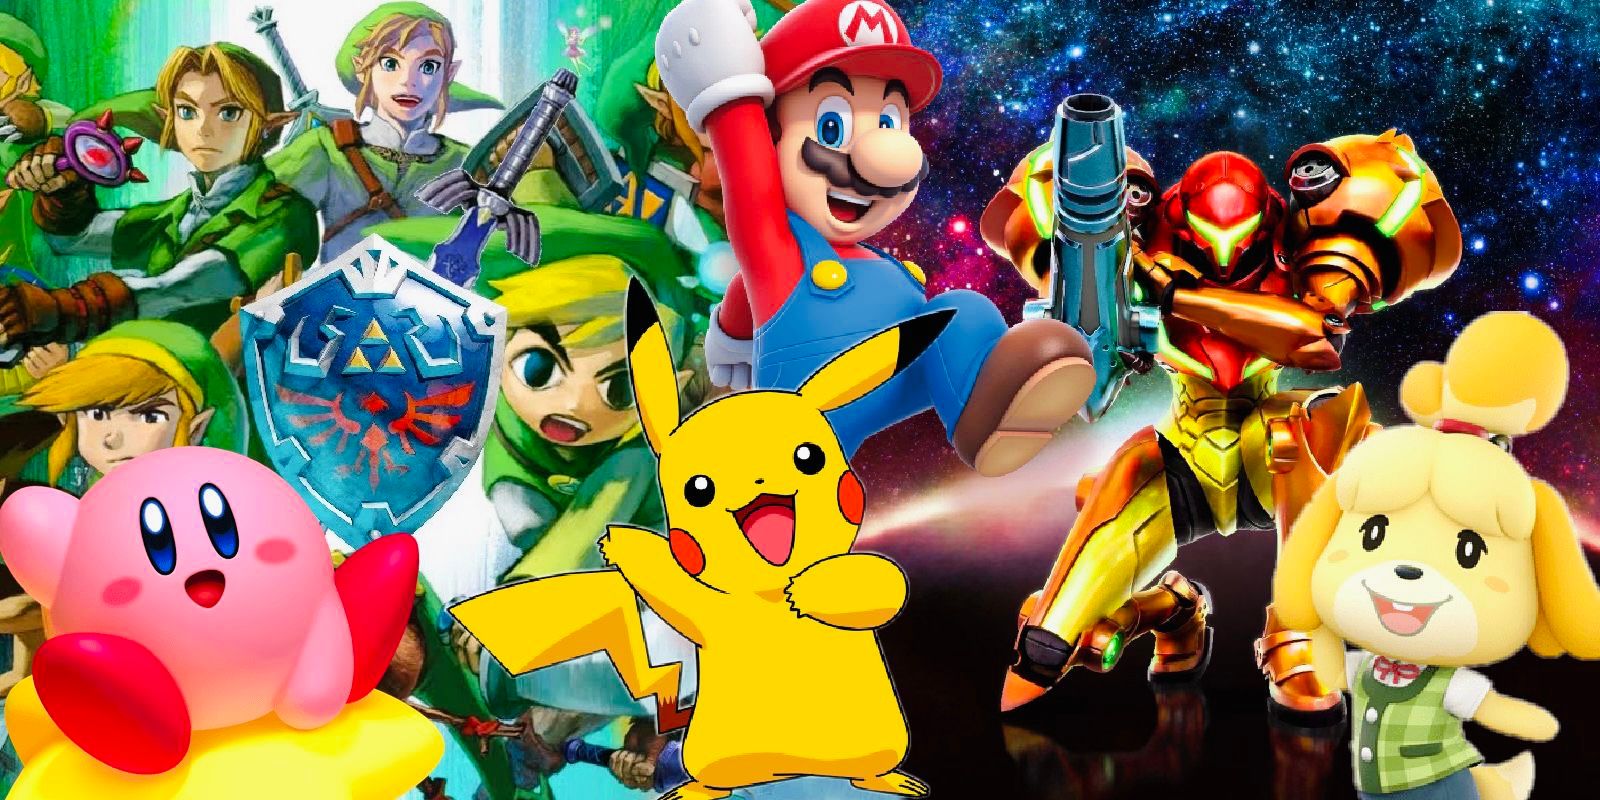 Nintendo now owns top 5 spots in Best Games of all Time at